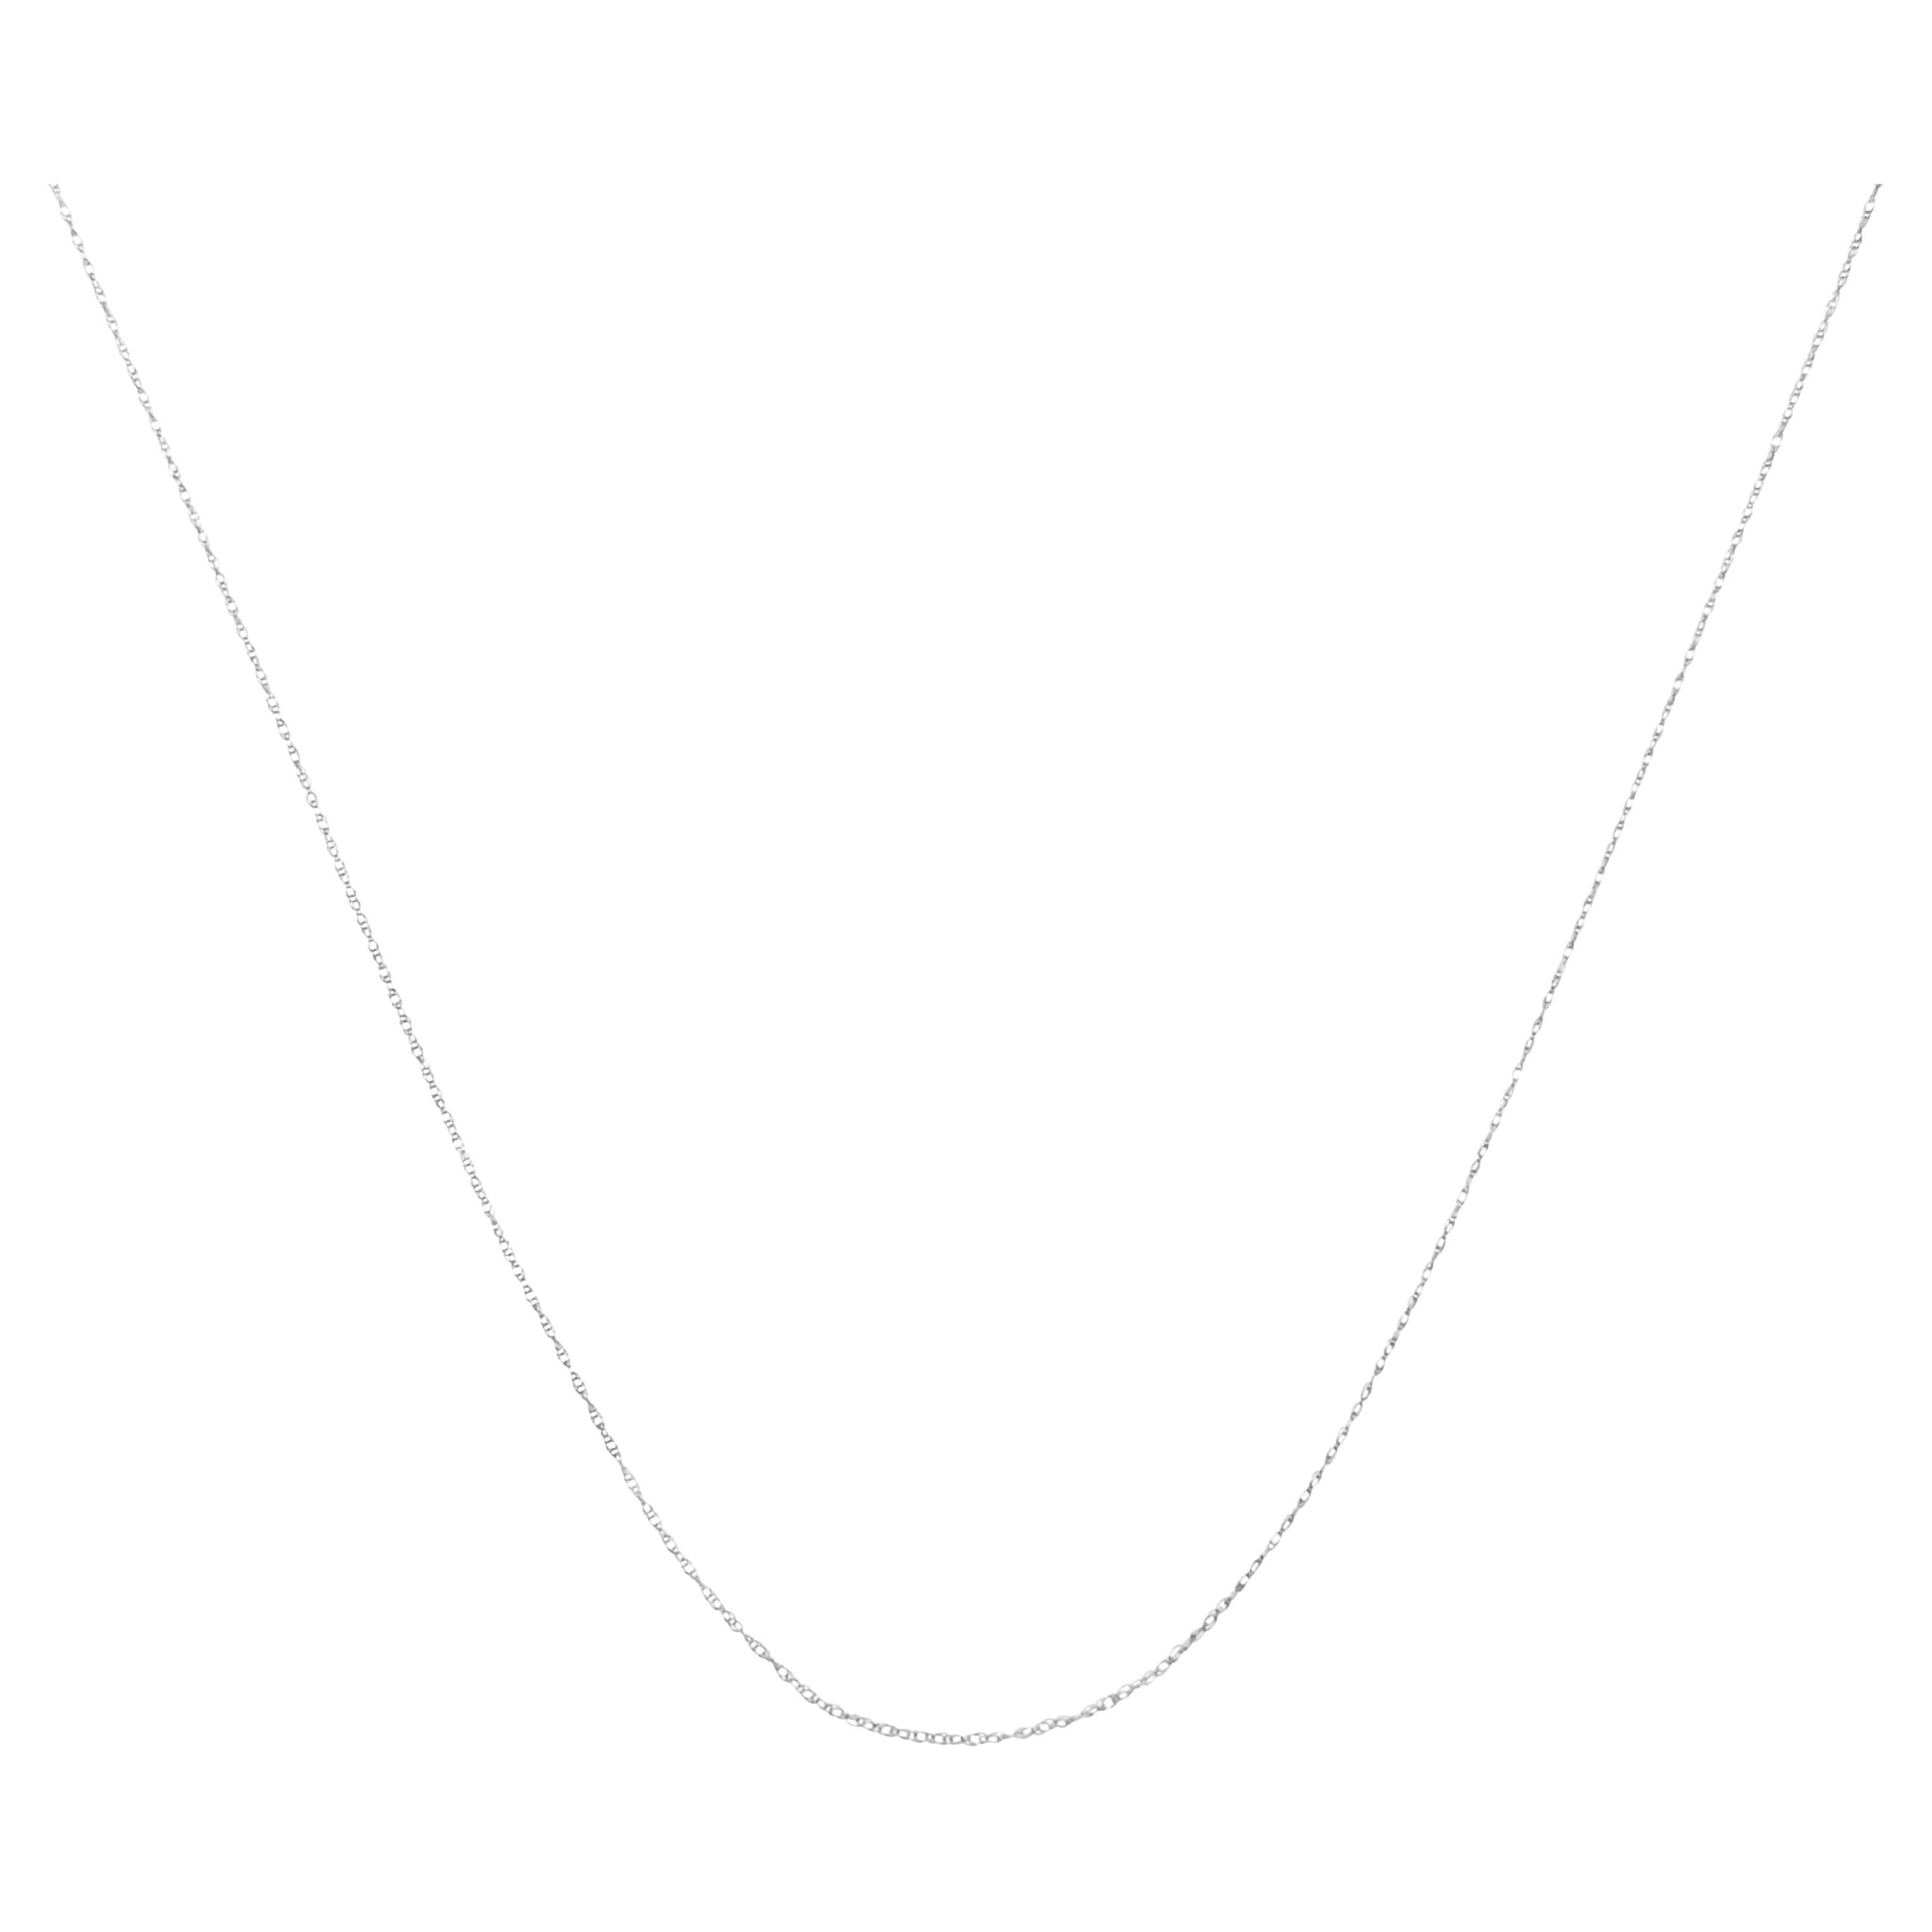 Solid 10K White Gold Slim and Dainty Unisex Rope Chain Necklace